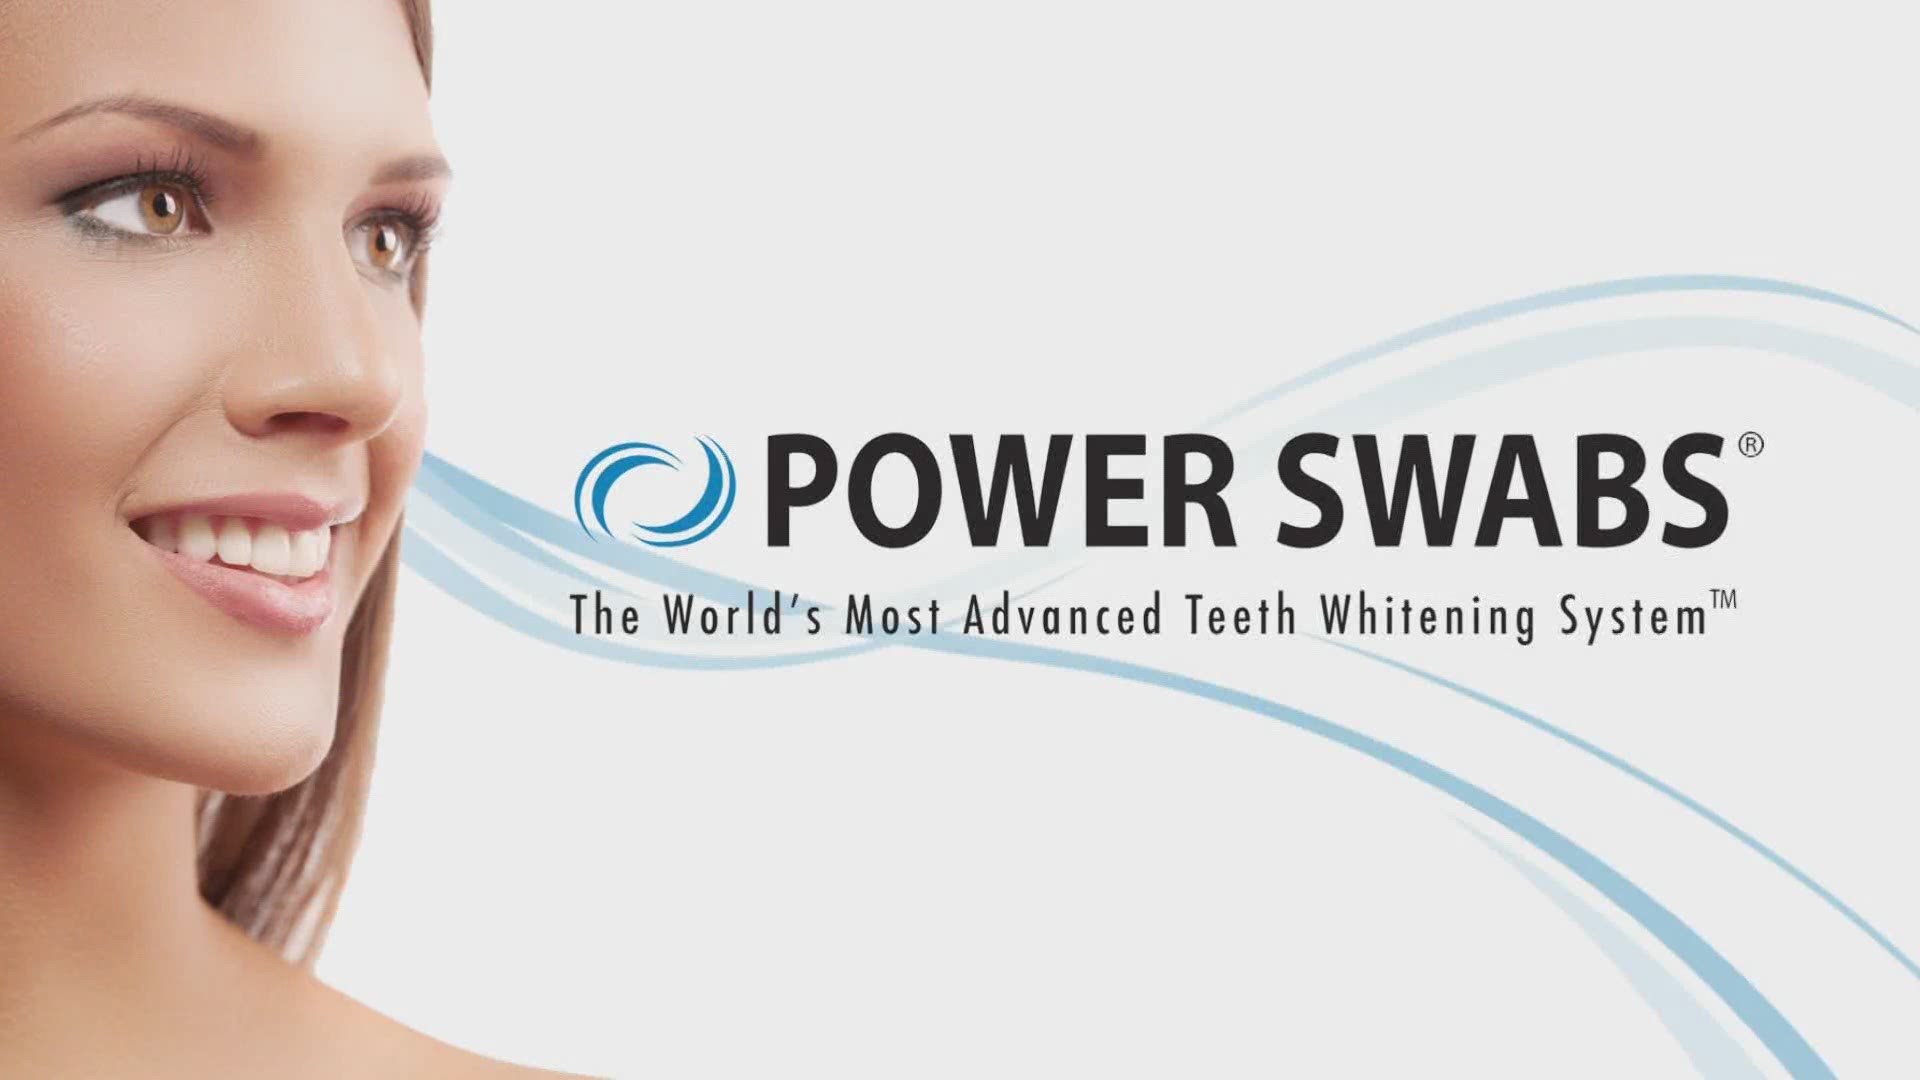 Lifestyle expert Annette Figueroa introduced us to a product called Power Swabs, which she says will whiten your smile and take years off of your appearance.